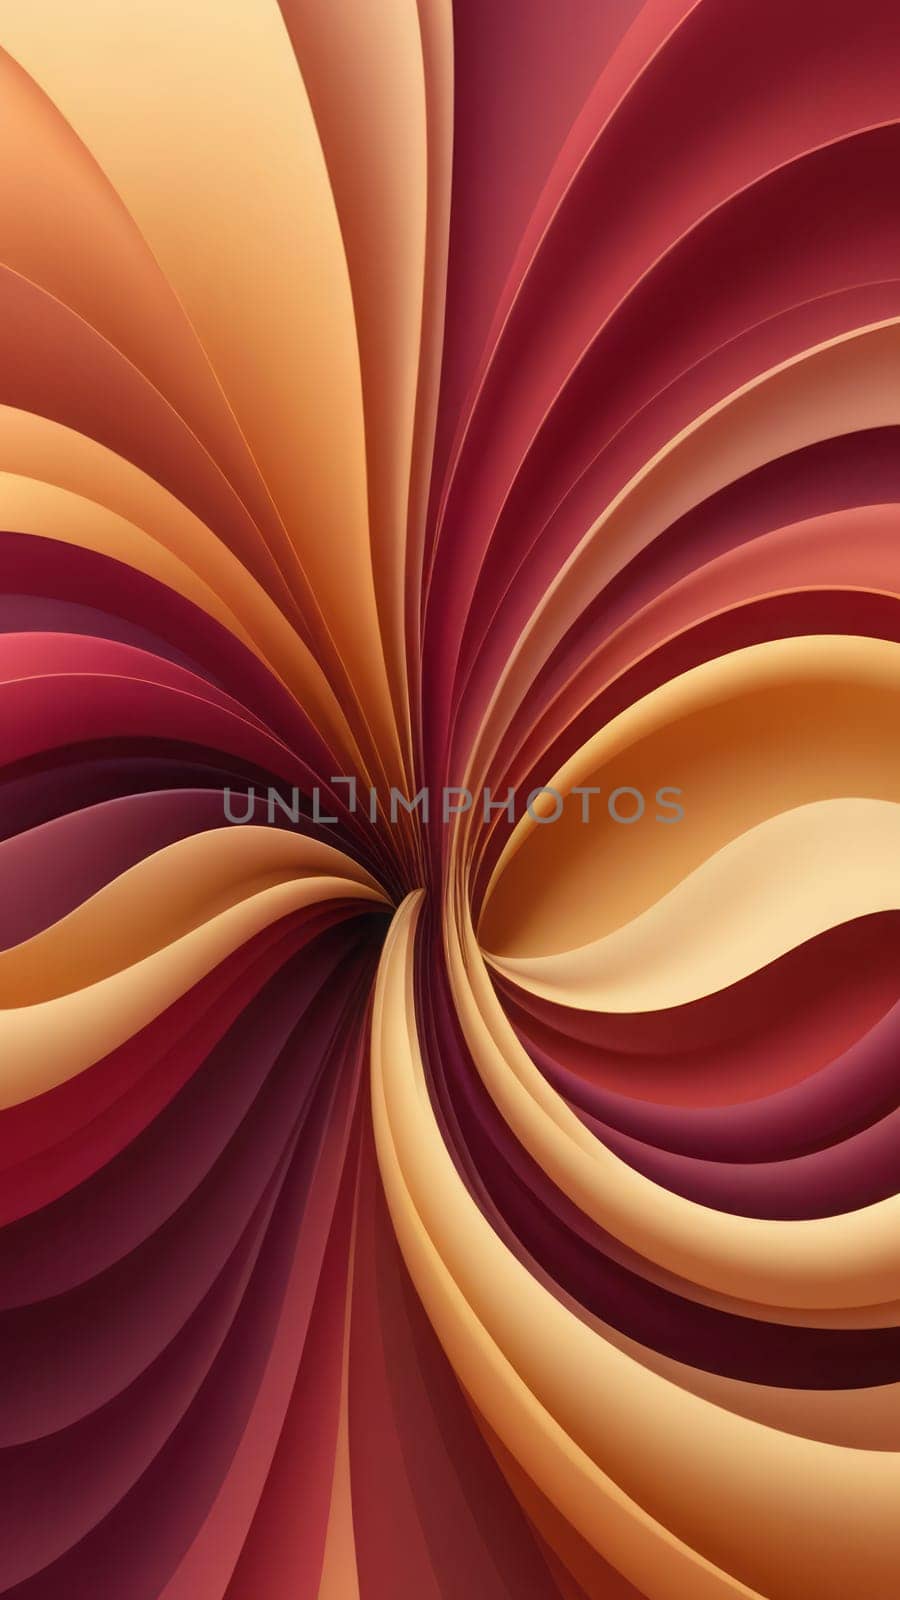 Colorful art from Swirled shapes and maroon by nkotlyar